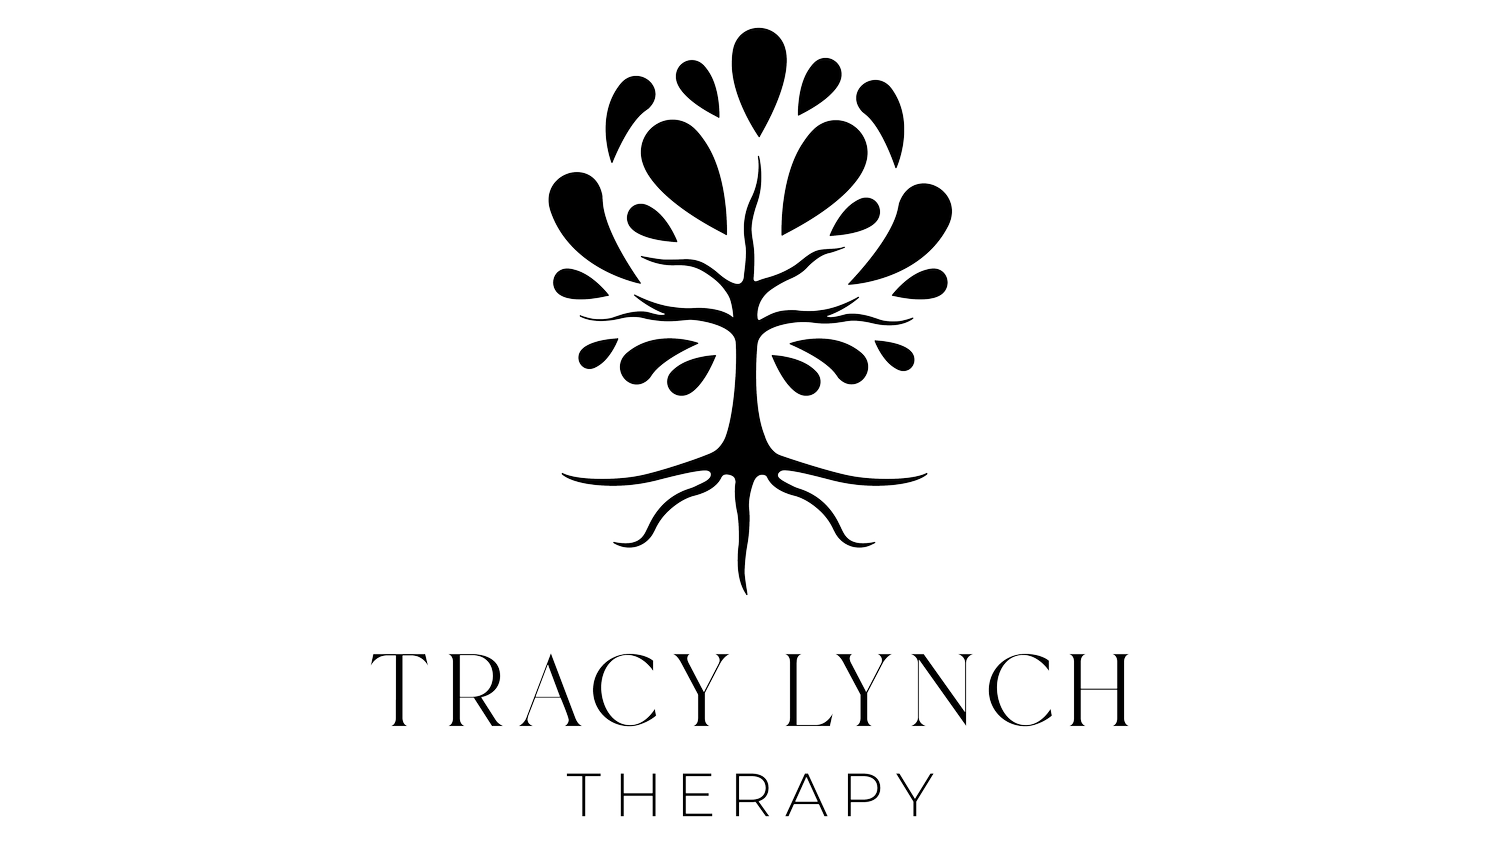 Tracy Lynch Therapy